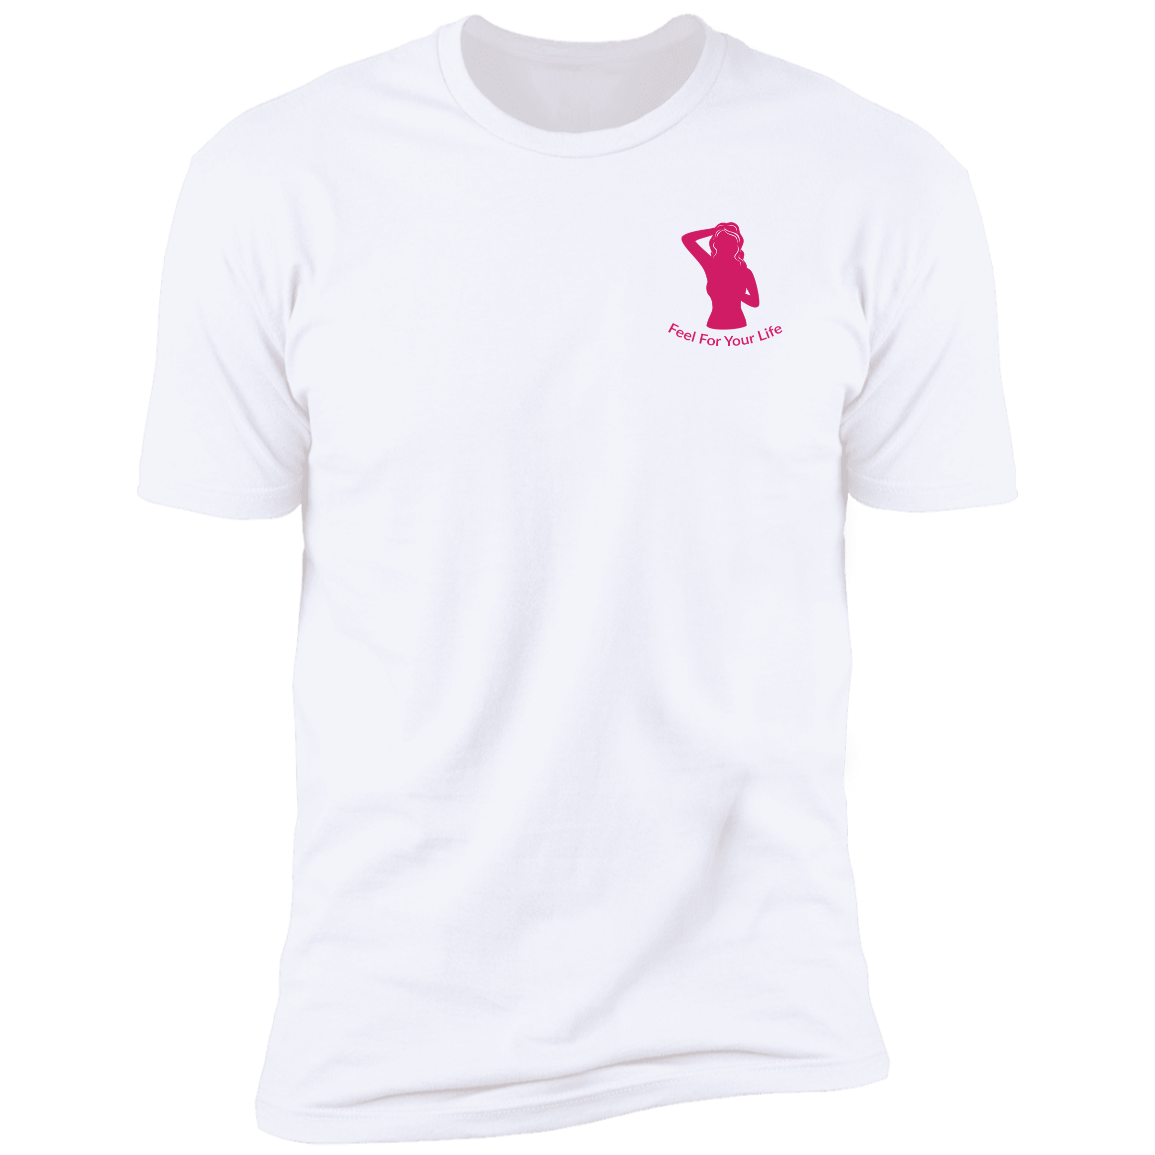 Feel For Your Life Unisex Short Sleeve Tshirt White Small Logo Pink